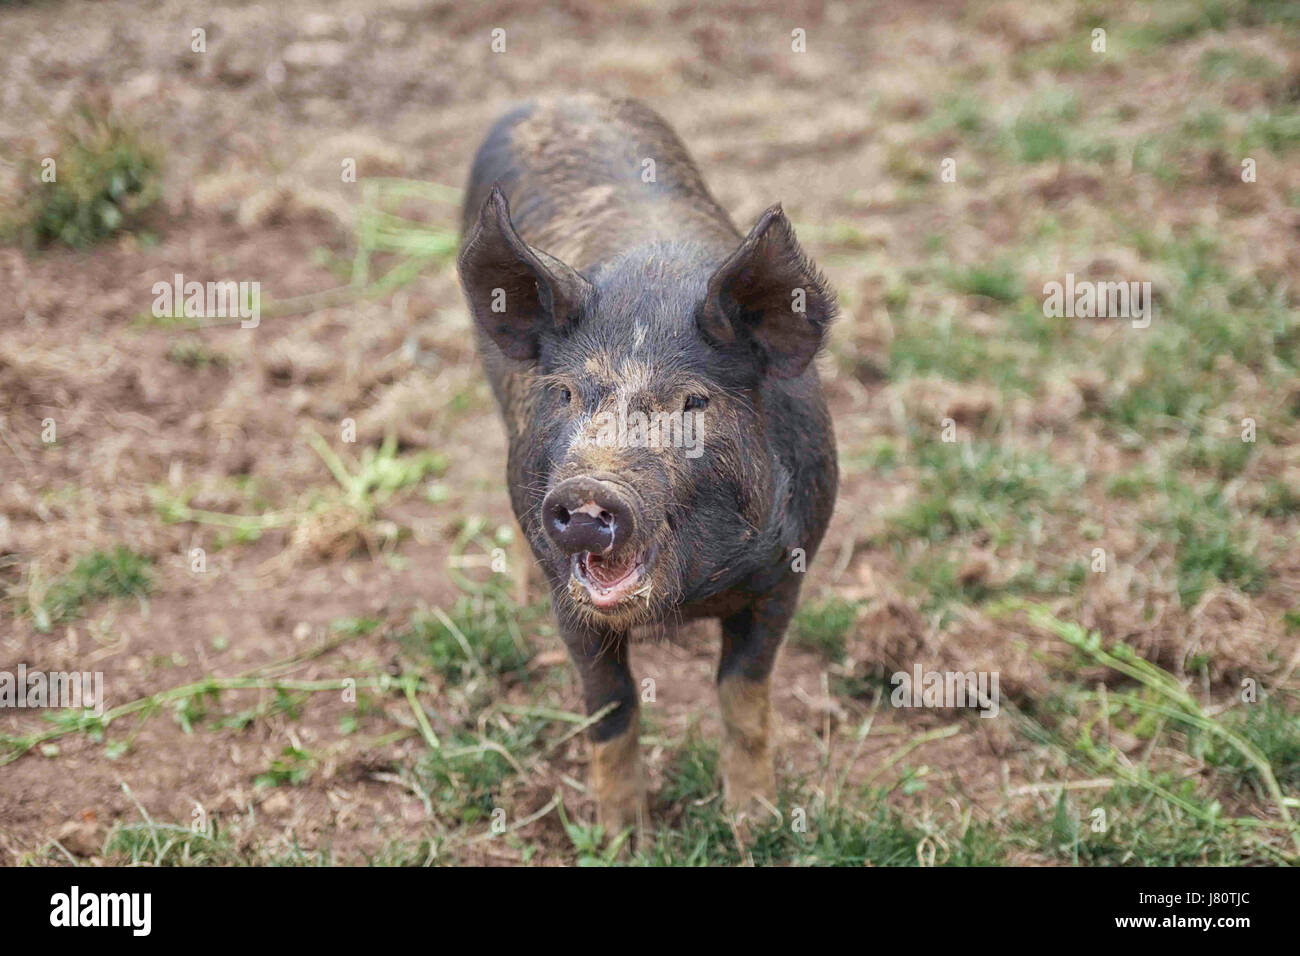 Cute muddy piglet on a farm looking at you Stock Photo